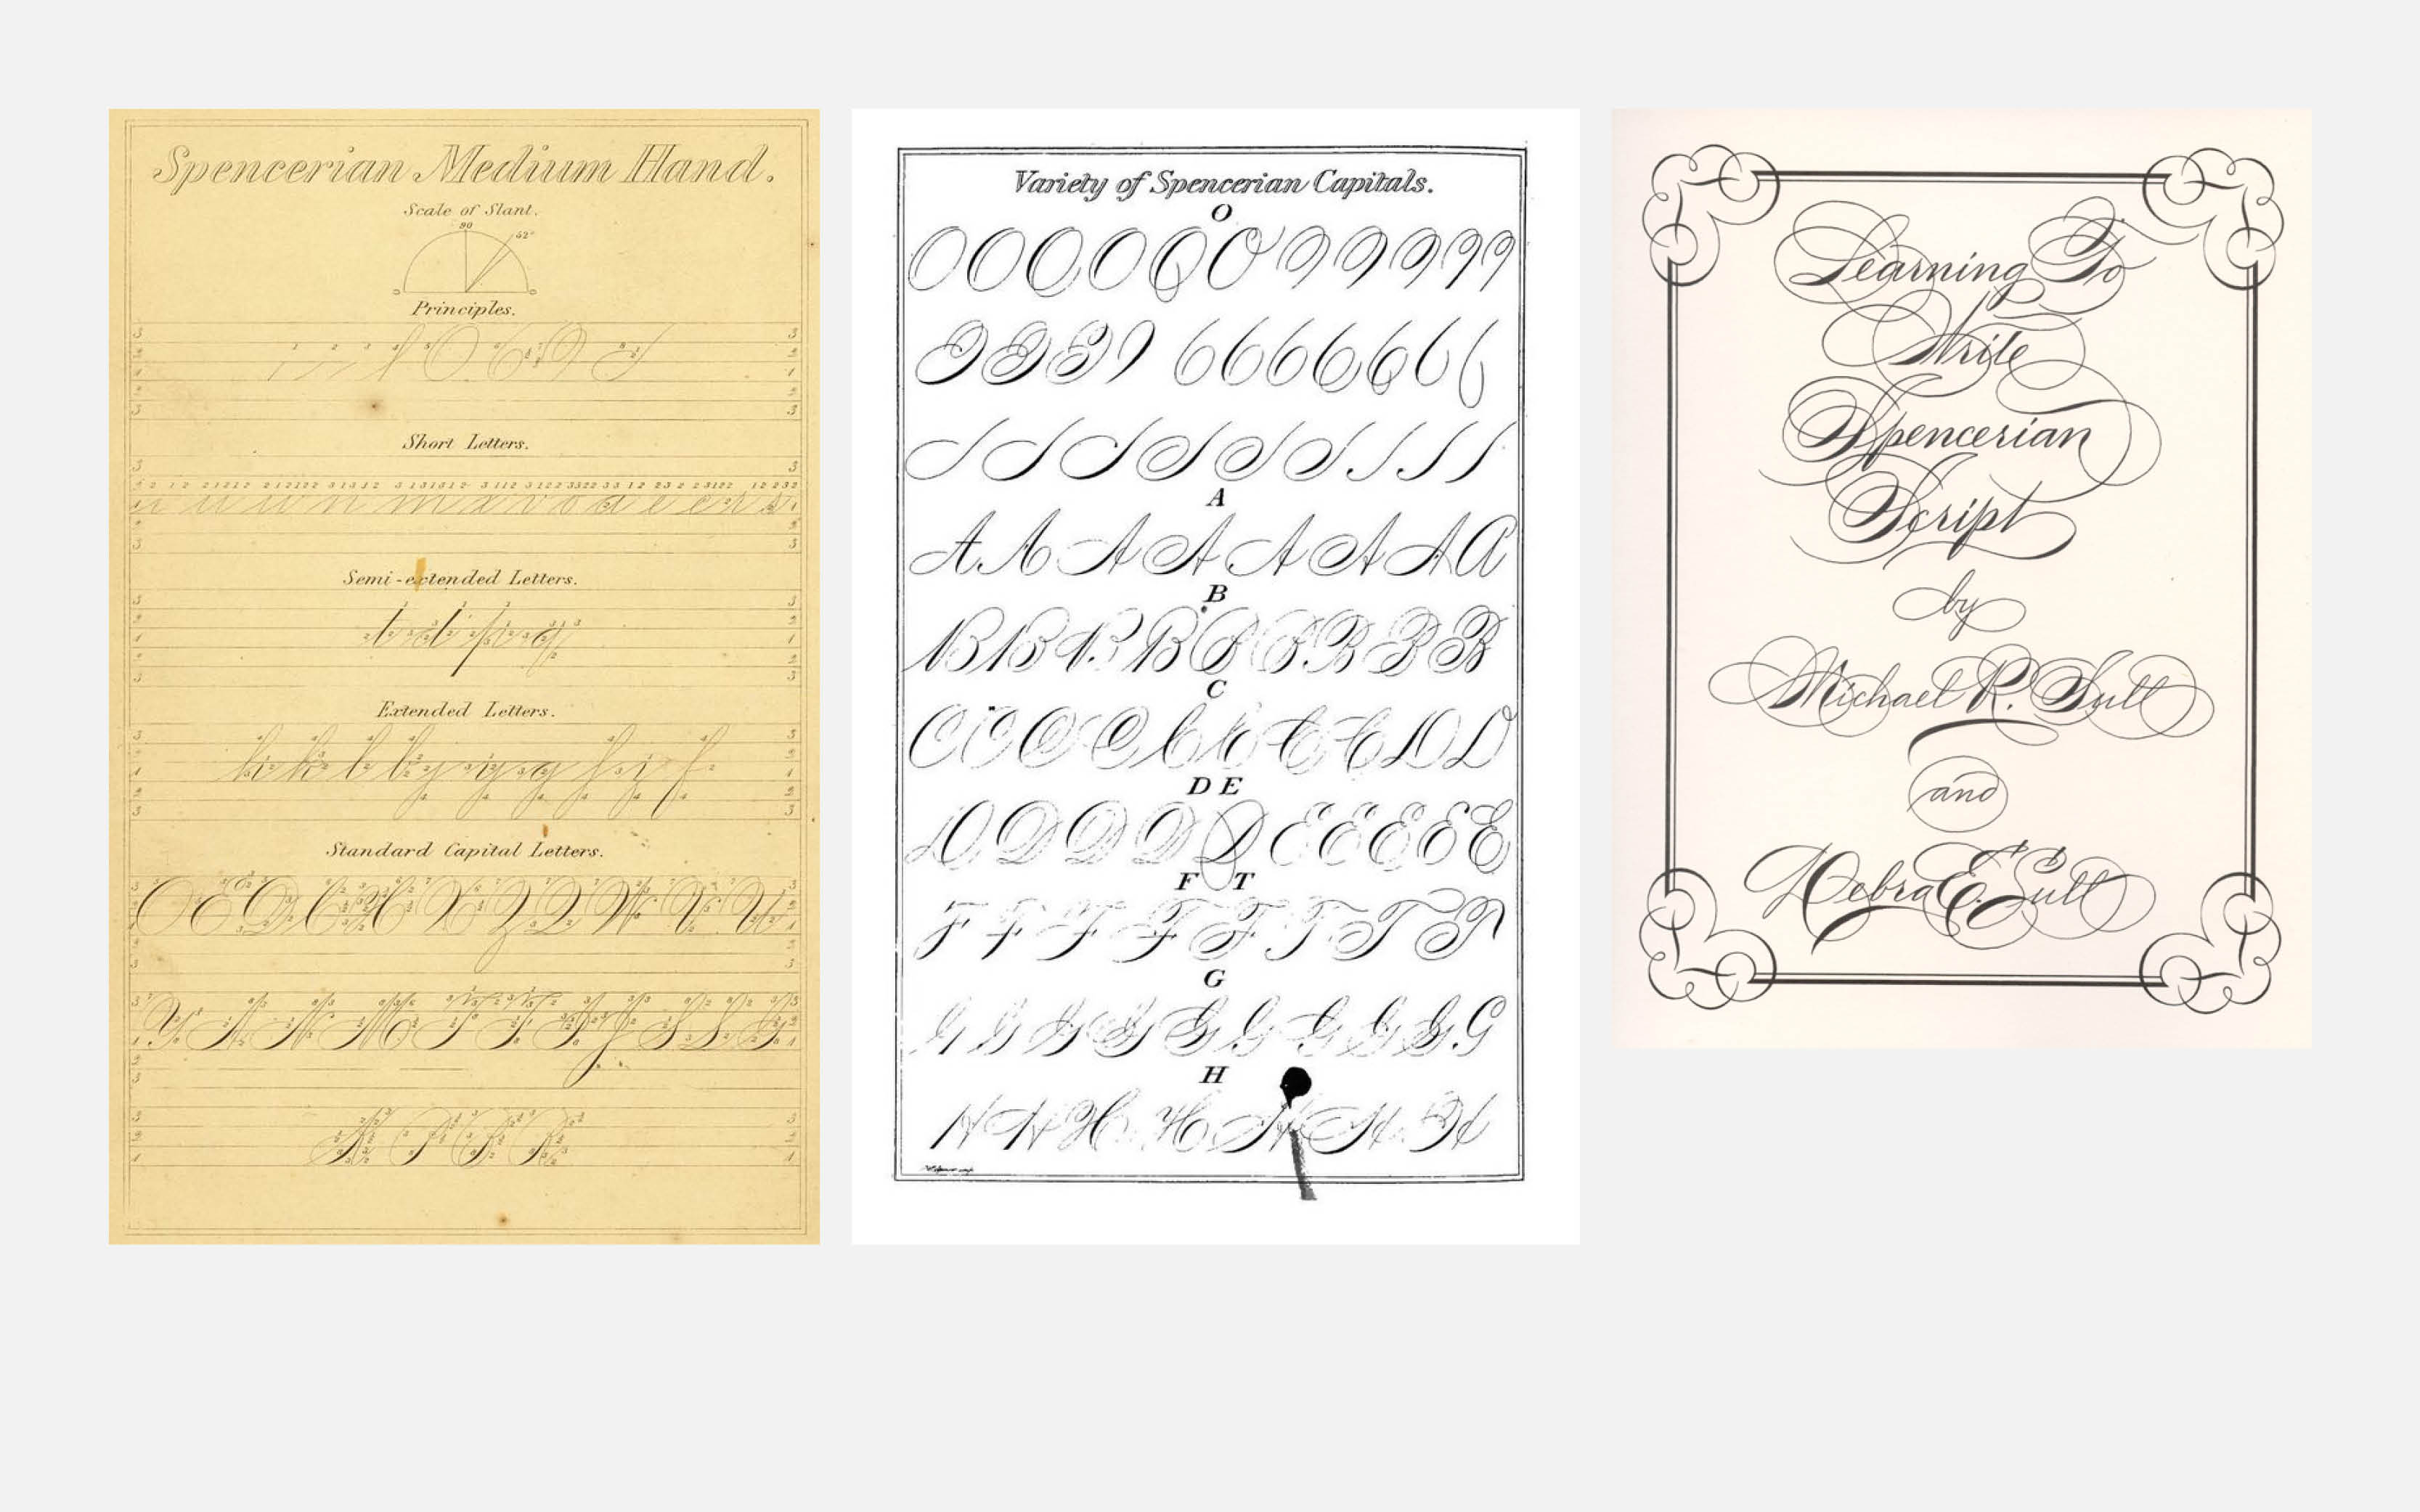 The first publications devoted to the practice of Spencerian script are dated from 1874.